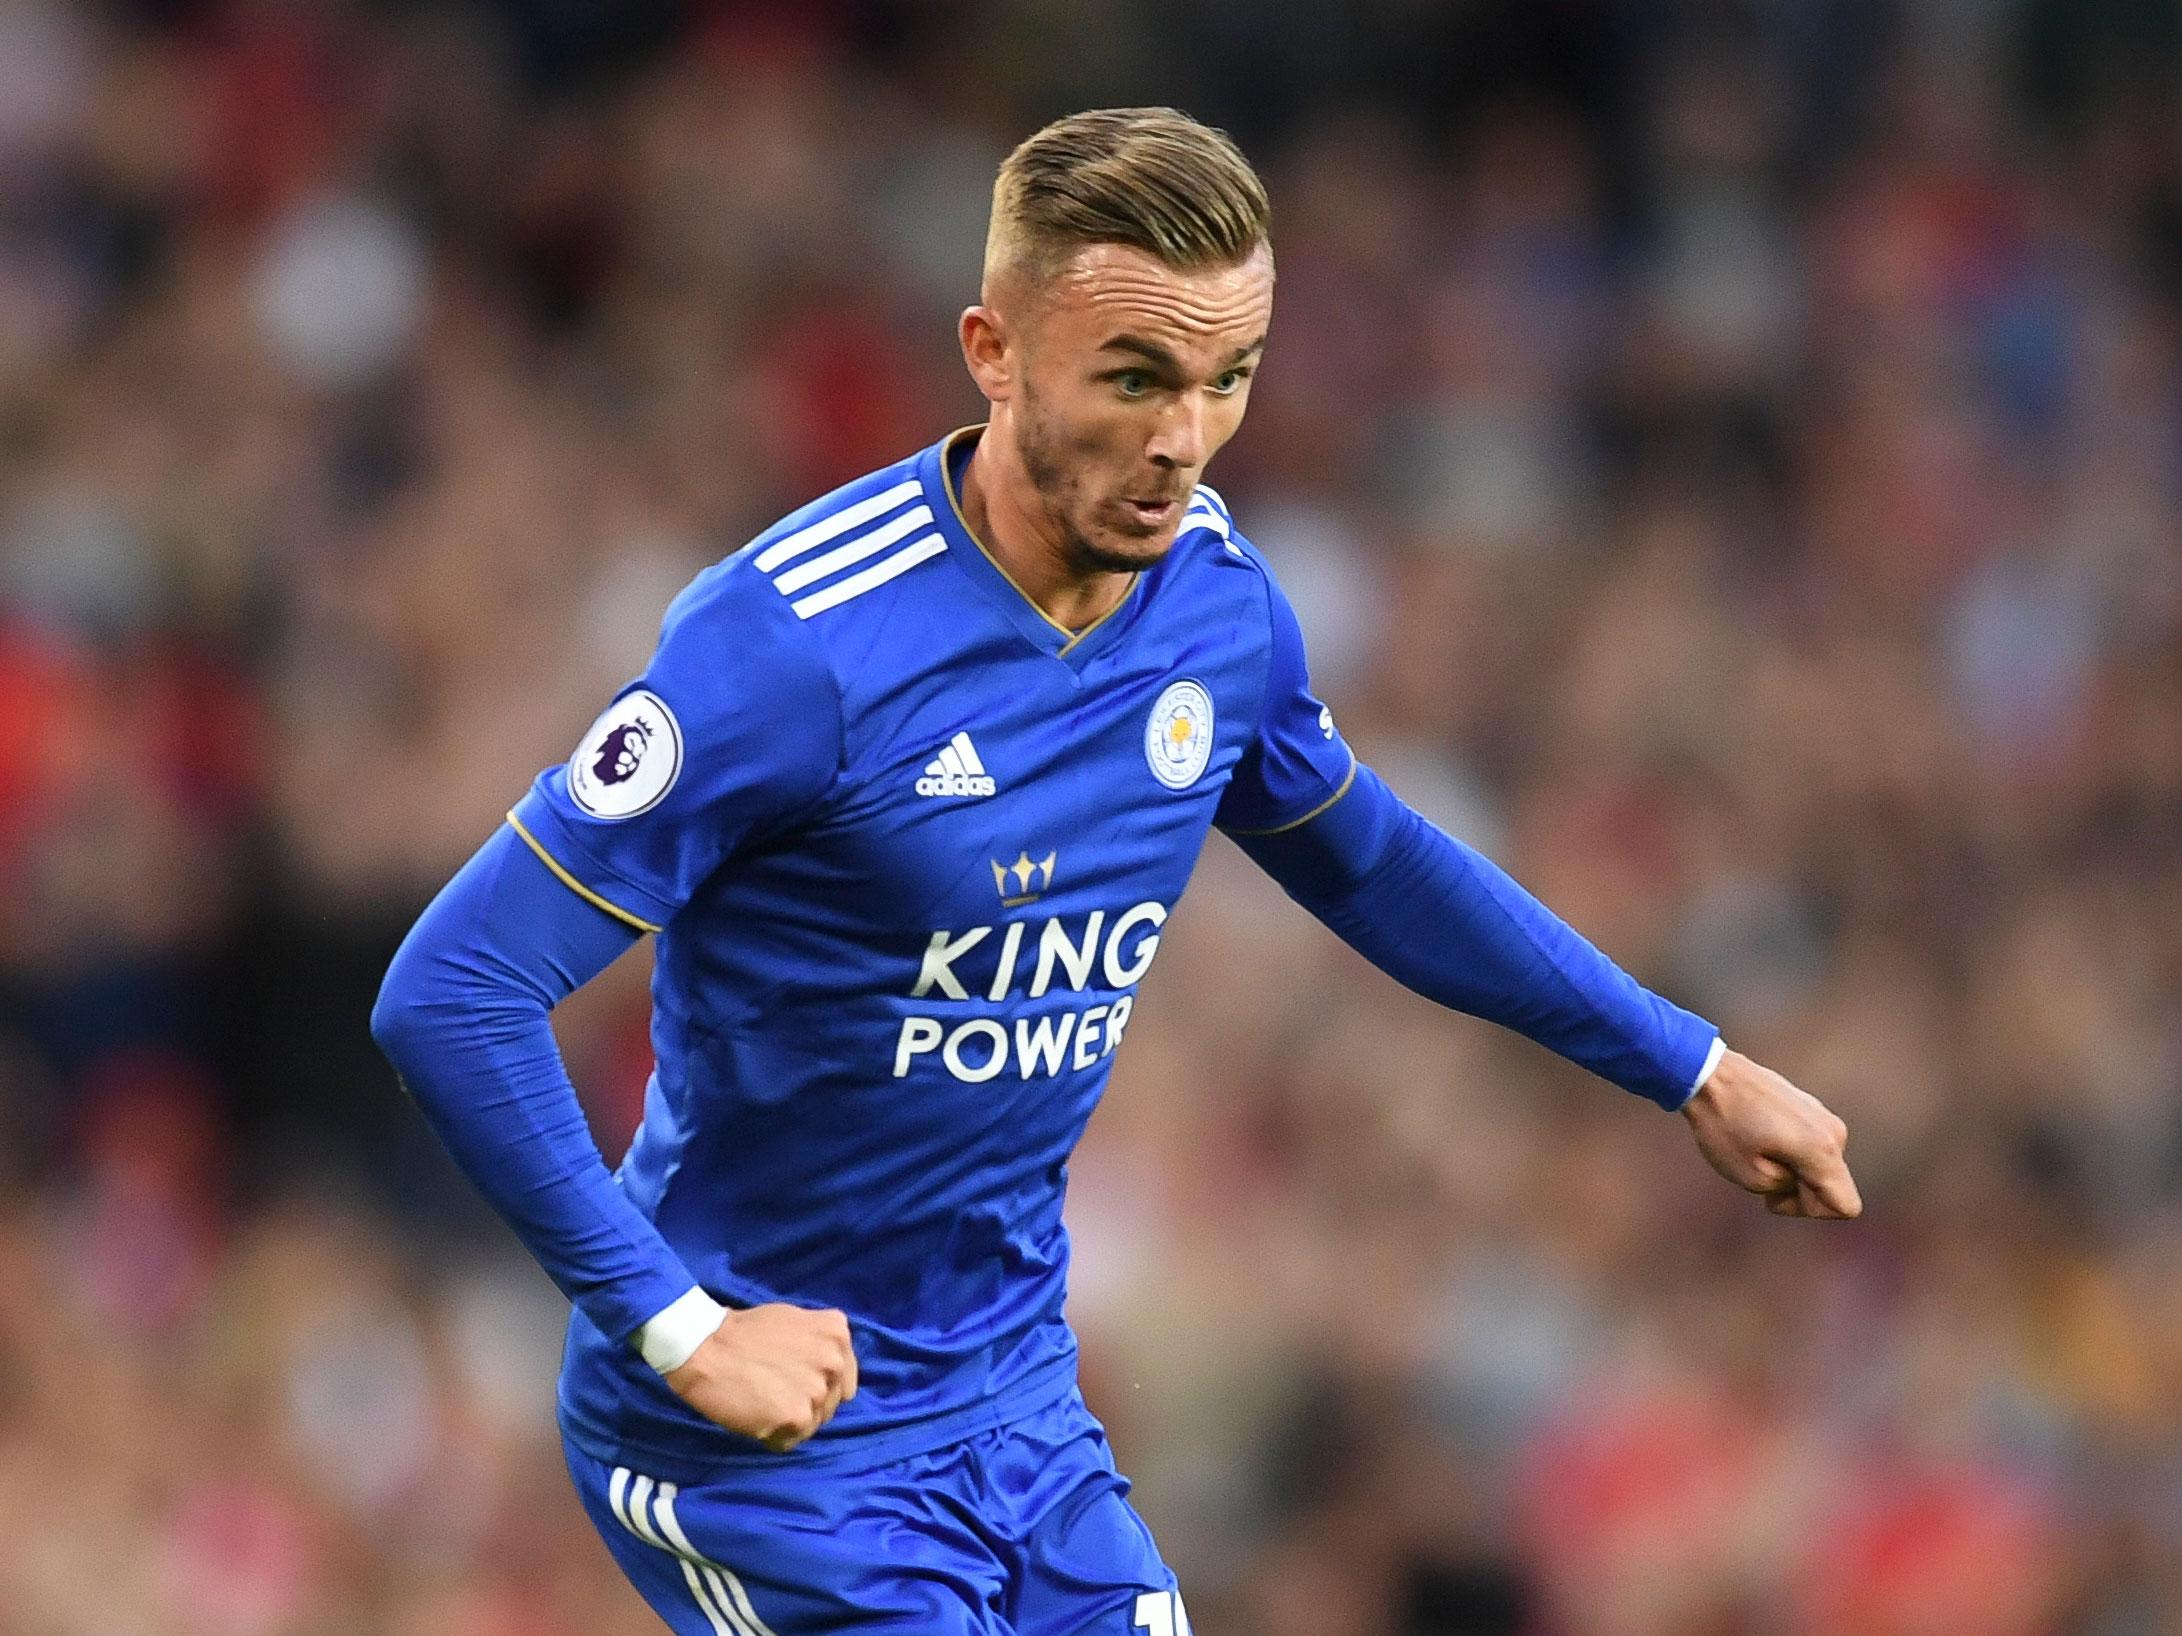 Claude Puel backs James Maddison to make his England debut this season after bright Premier League start